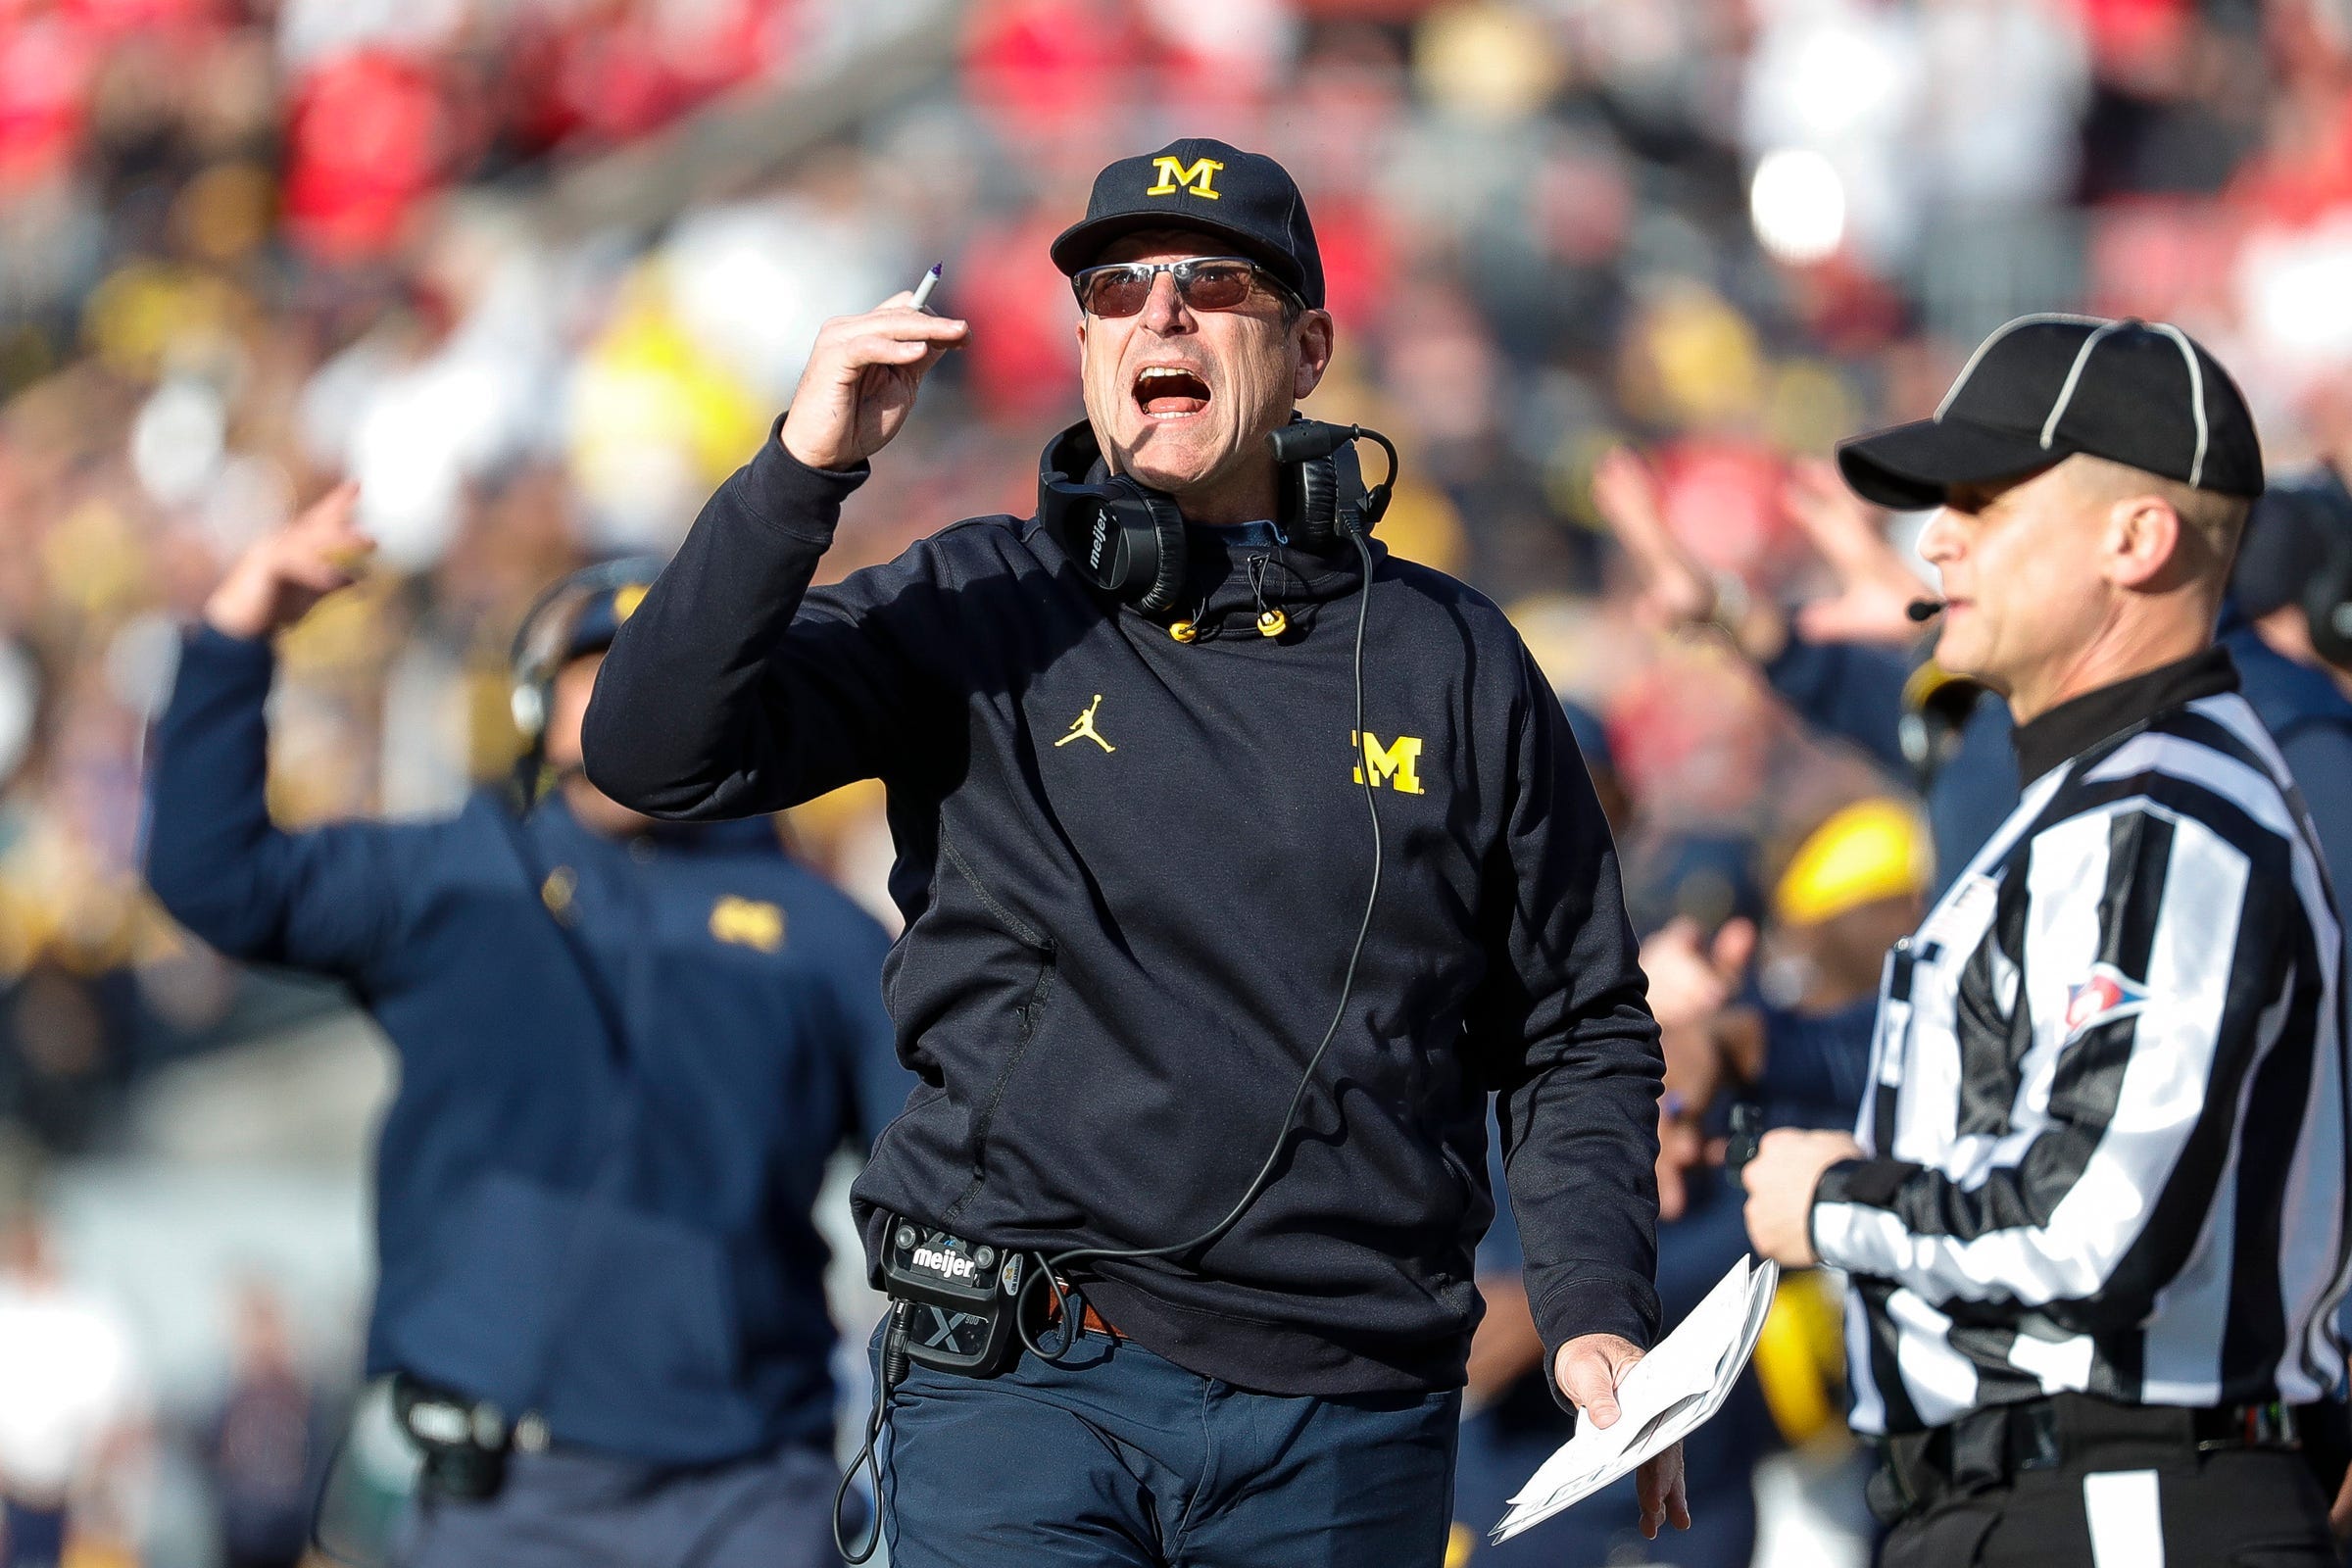 Jim Harbaugh claims ‘I’m cool now’ after suspension